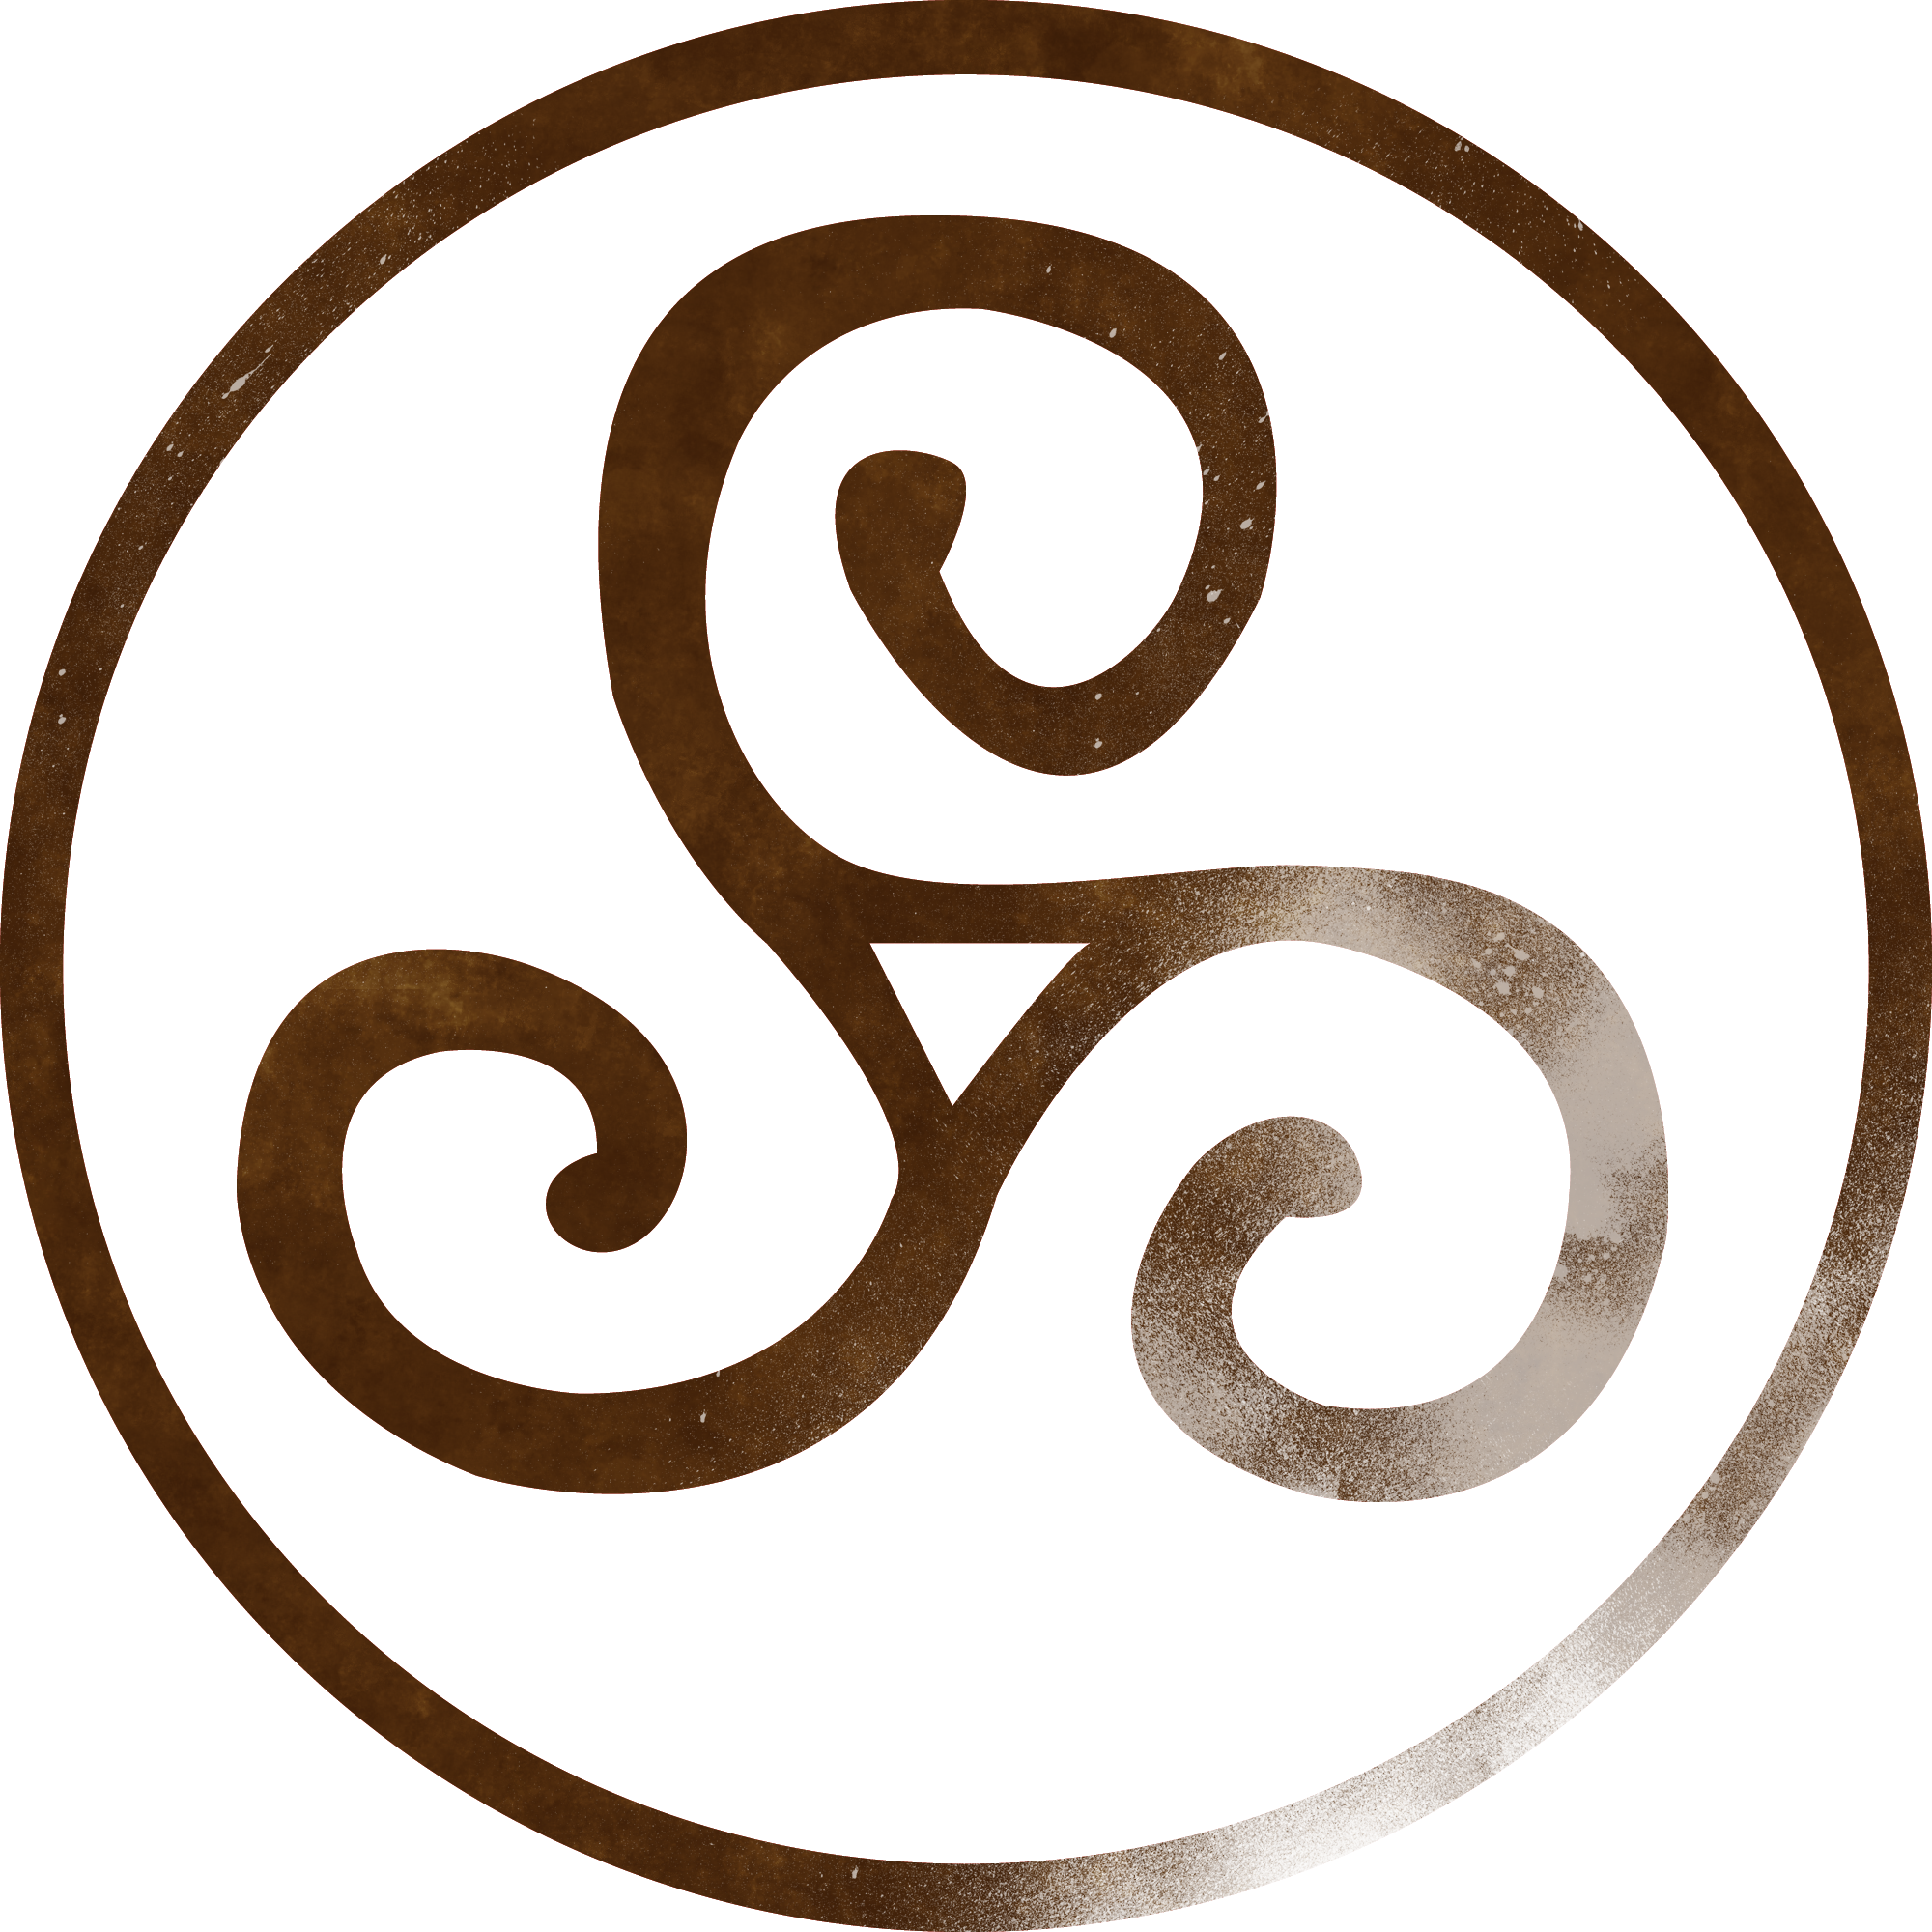 Image - Dianalogo.png | The Secret Circle Wiki | FANDOM powered by Wikia